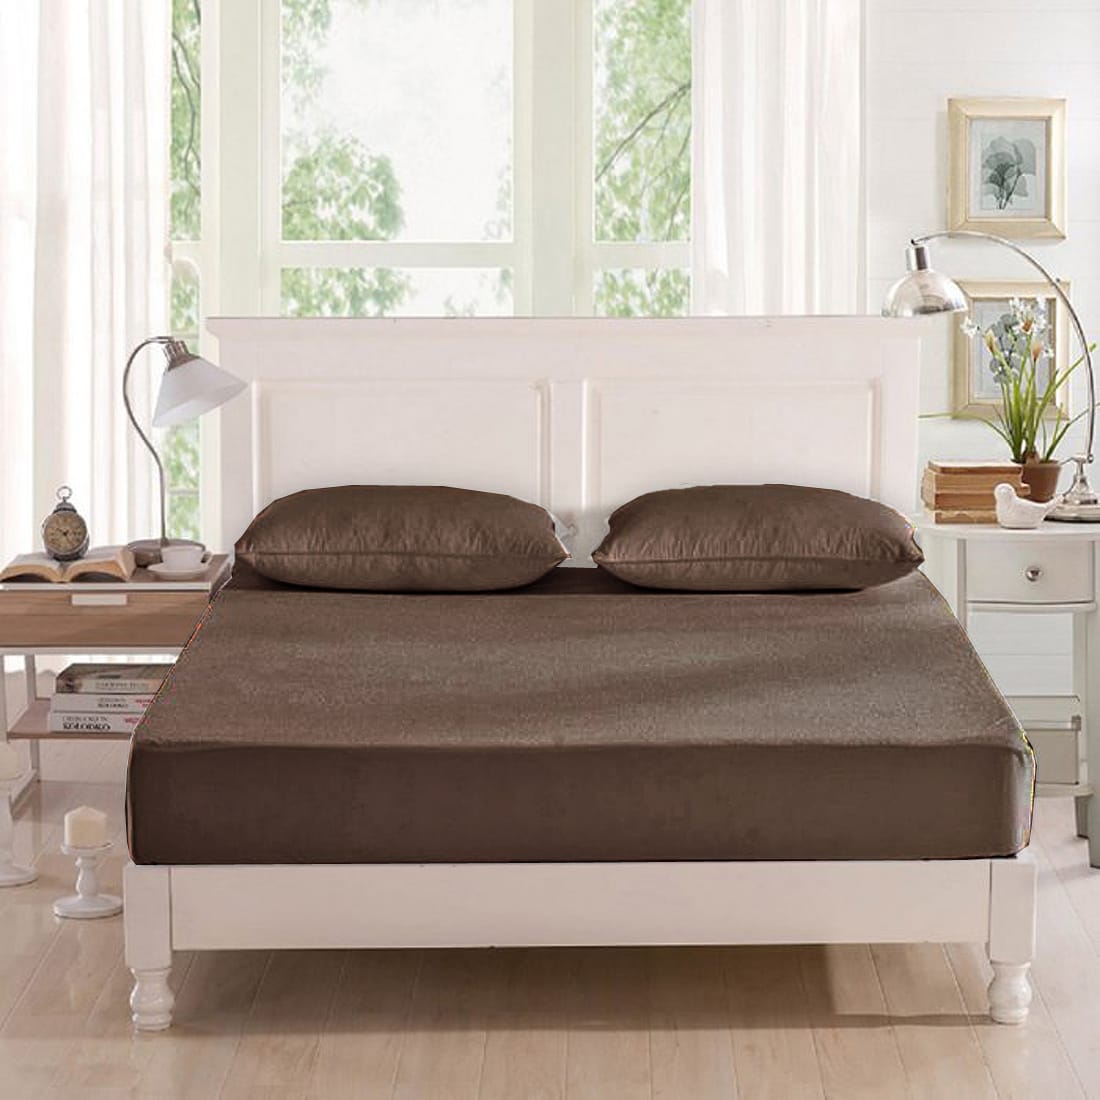 Coffee Brown Water Proof Terry Mattress Protector online at best prices 